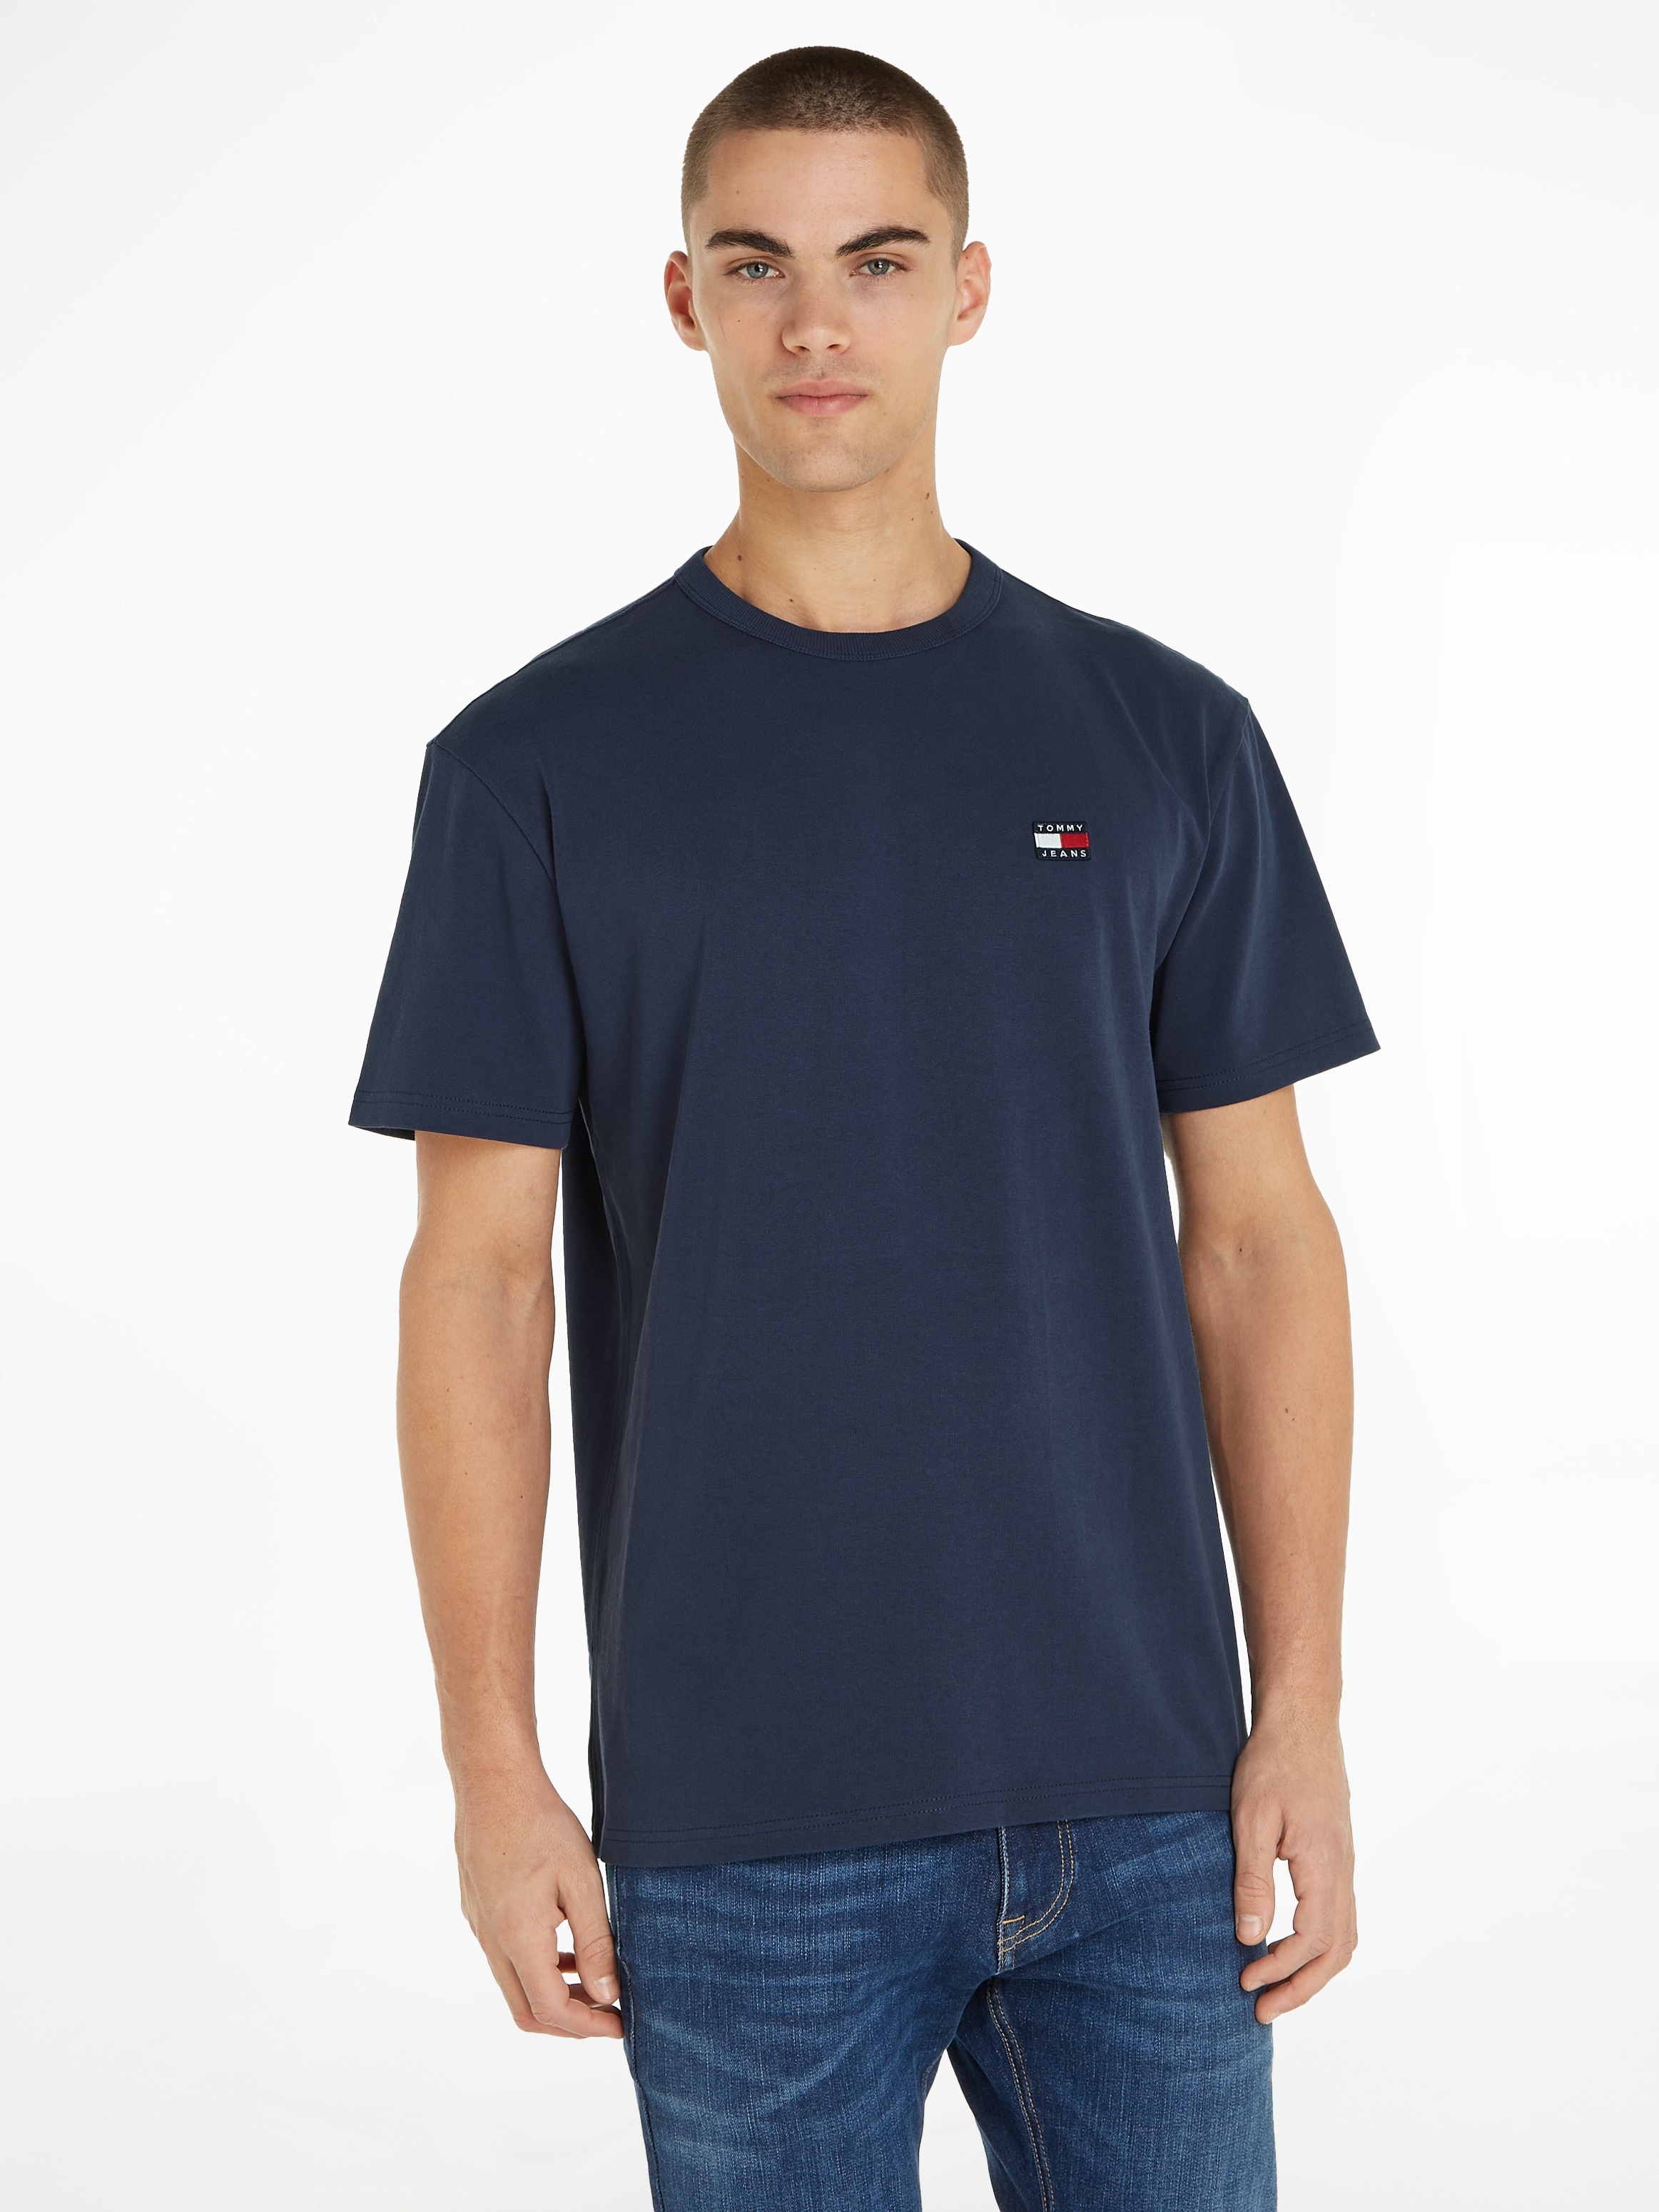 Tommy Jeans OTTO TEE« XS bei online TOMMY CLSC T-Shirt shoppen BADGE »TJM